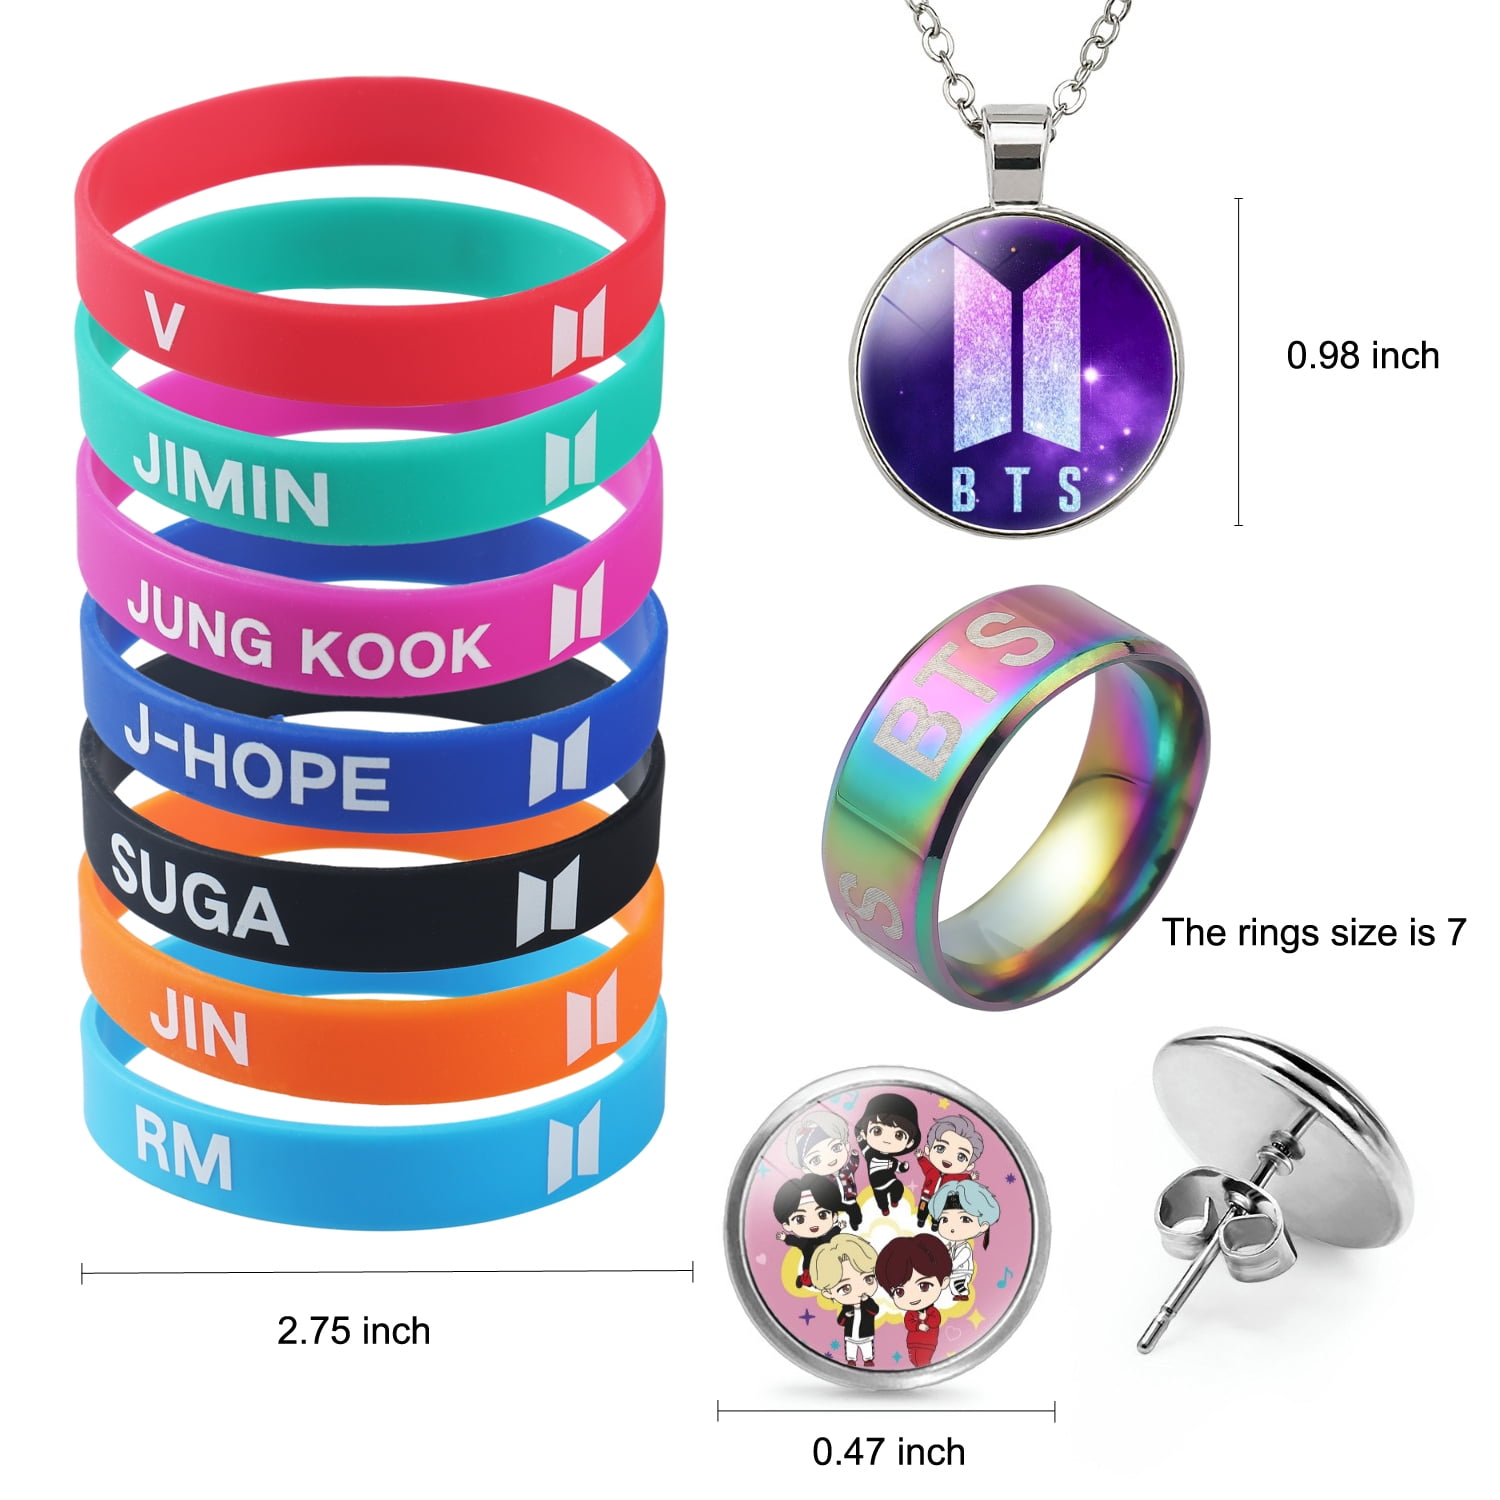  KINON BTS Gift Sets, Including Drawstring Bag Backpack, Pillow  Cover, Face Masks, BTS Glossy Stickers, Button Pins, Bracelets, Lanyard,  Phone Ring Holder, Keychain, Necklace, Lomo Cards